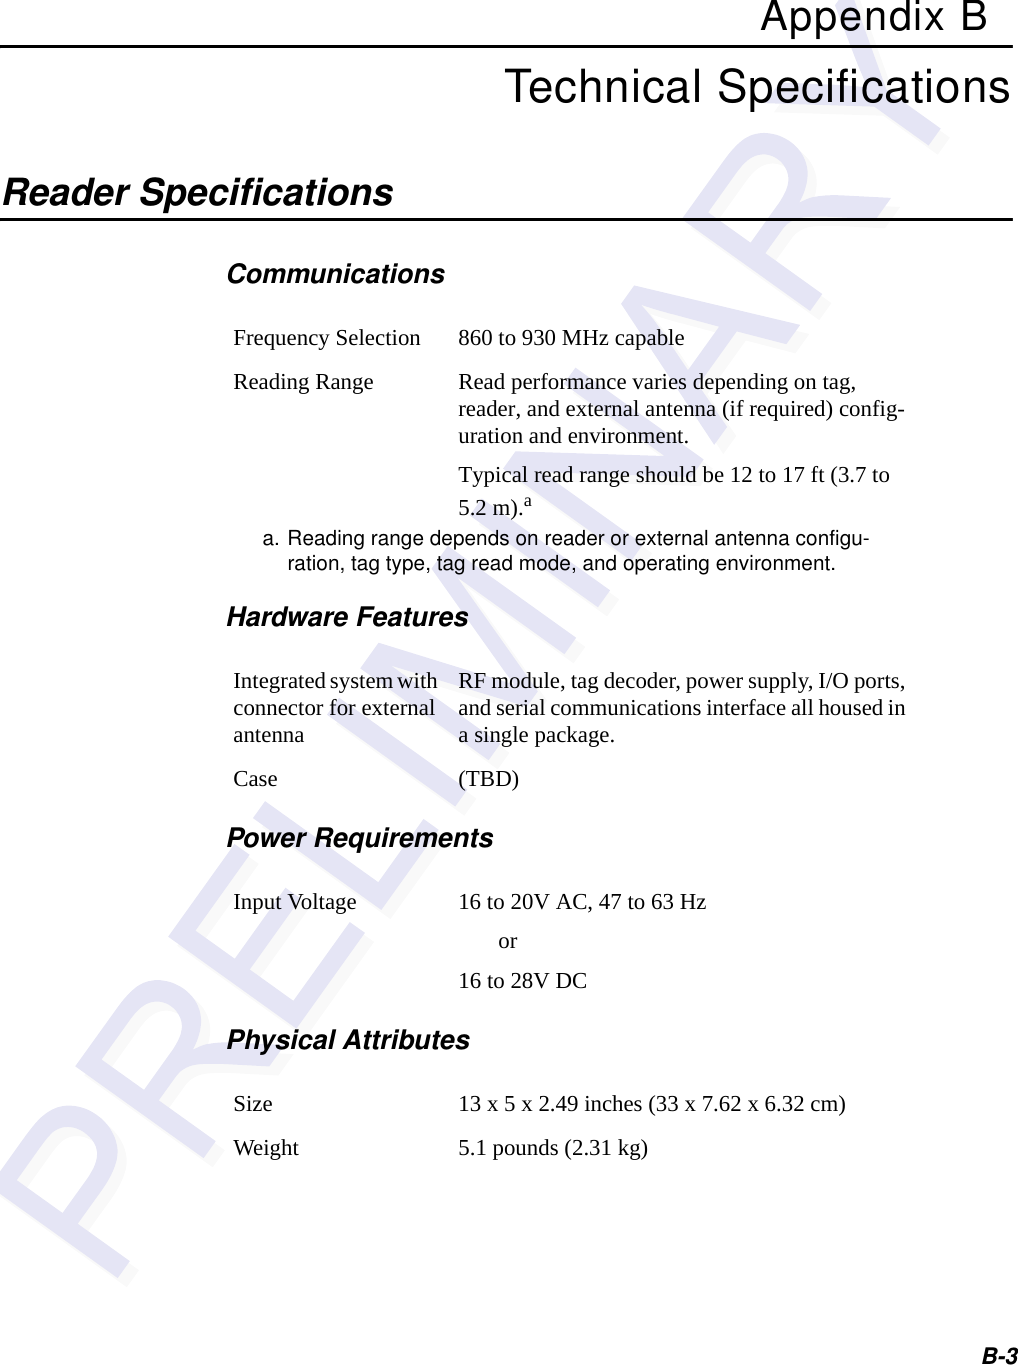 B-3Appendix BTechnical SpecificationsReader Specifications CommunicationsHardware FeaturesPower RequirementsPhysical AttributesFrequency Selection 860 to 930 MHz capableReading Range Read performance varies depending on tag, reader, and external antenna (if required) config-uration and environment.Typical read range should be 12 to 17 ft (3.7 to 5.2 m).aa. Reading range depends on reader or external antenna configu-ration, tag type, tag read mode, and operating environment.Integrated system with connector for external antennaRF module, tag decoder, power supply, I/O ports, and serial communications interface all housed in a single package.Case (TBD)Input Voltage 16 to 20V AC, 47 to 63 Hz       or16 to 28V DCSize 13 x 5 x 2.49 inches (33 x 7.62 x 6.32 cm)Weight 5.1 pounds (2.31 kg)